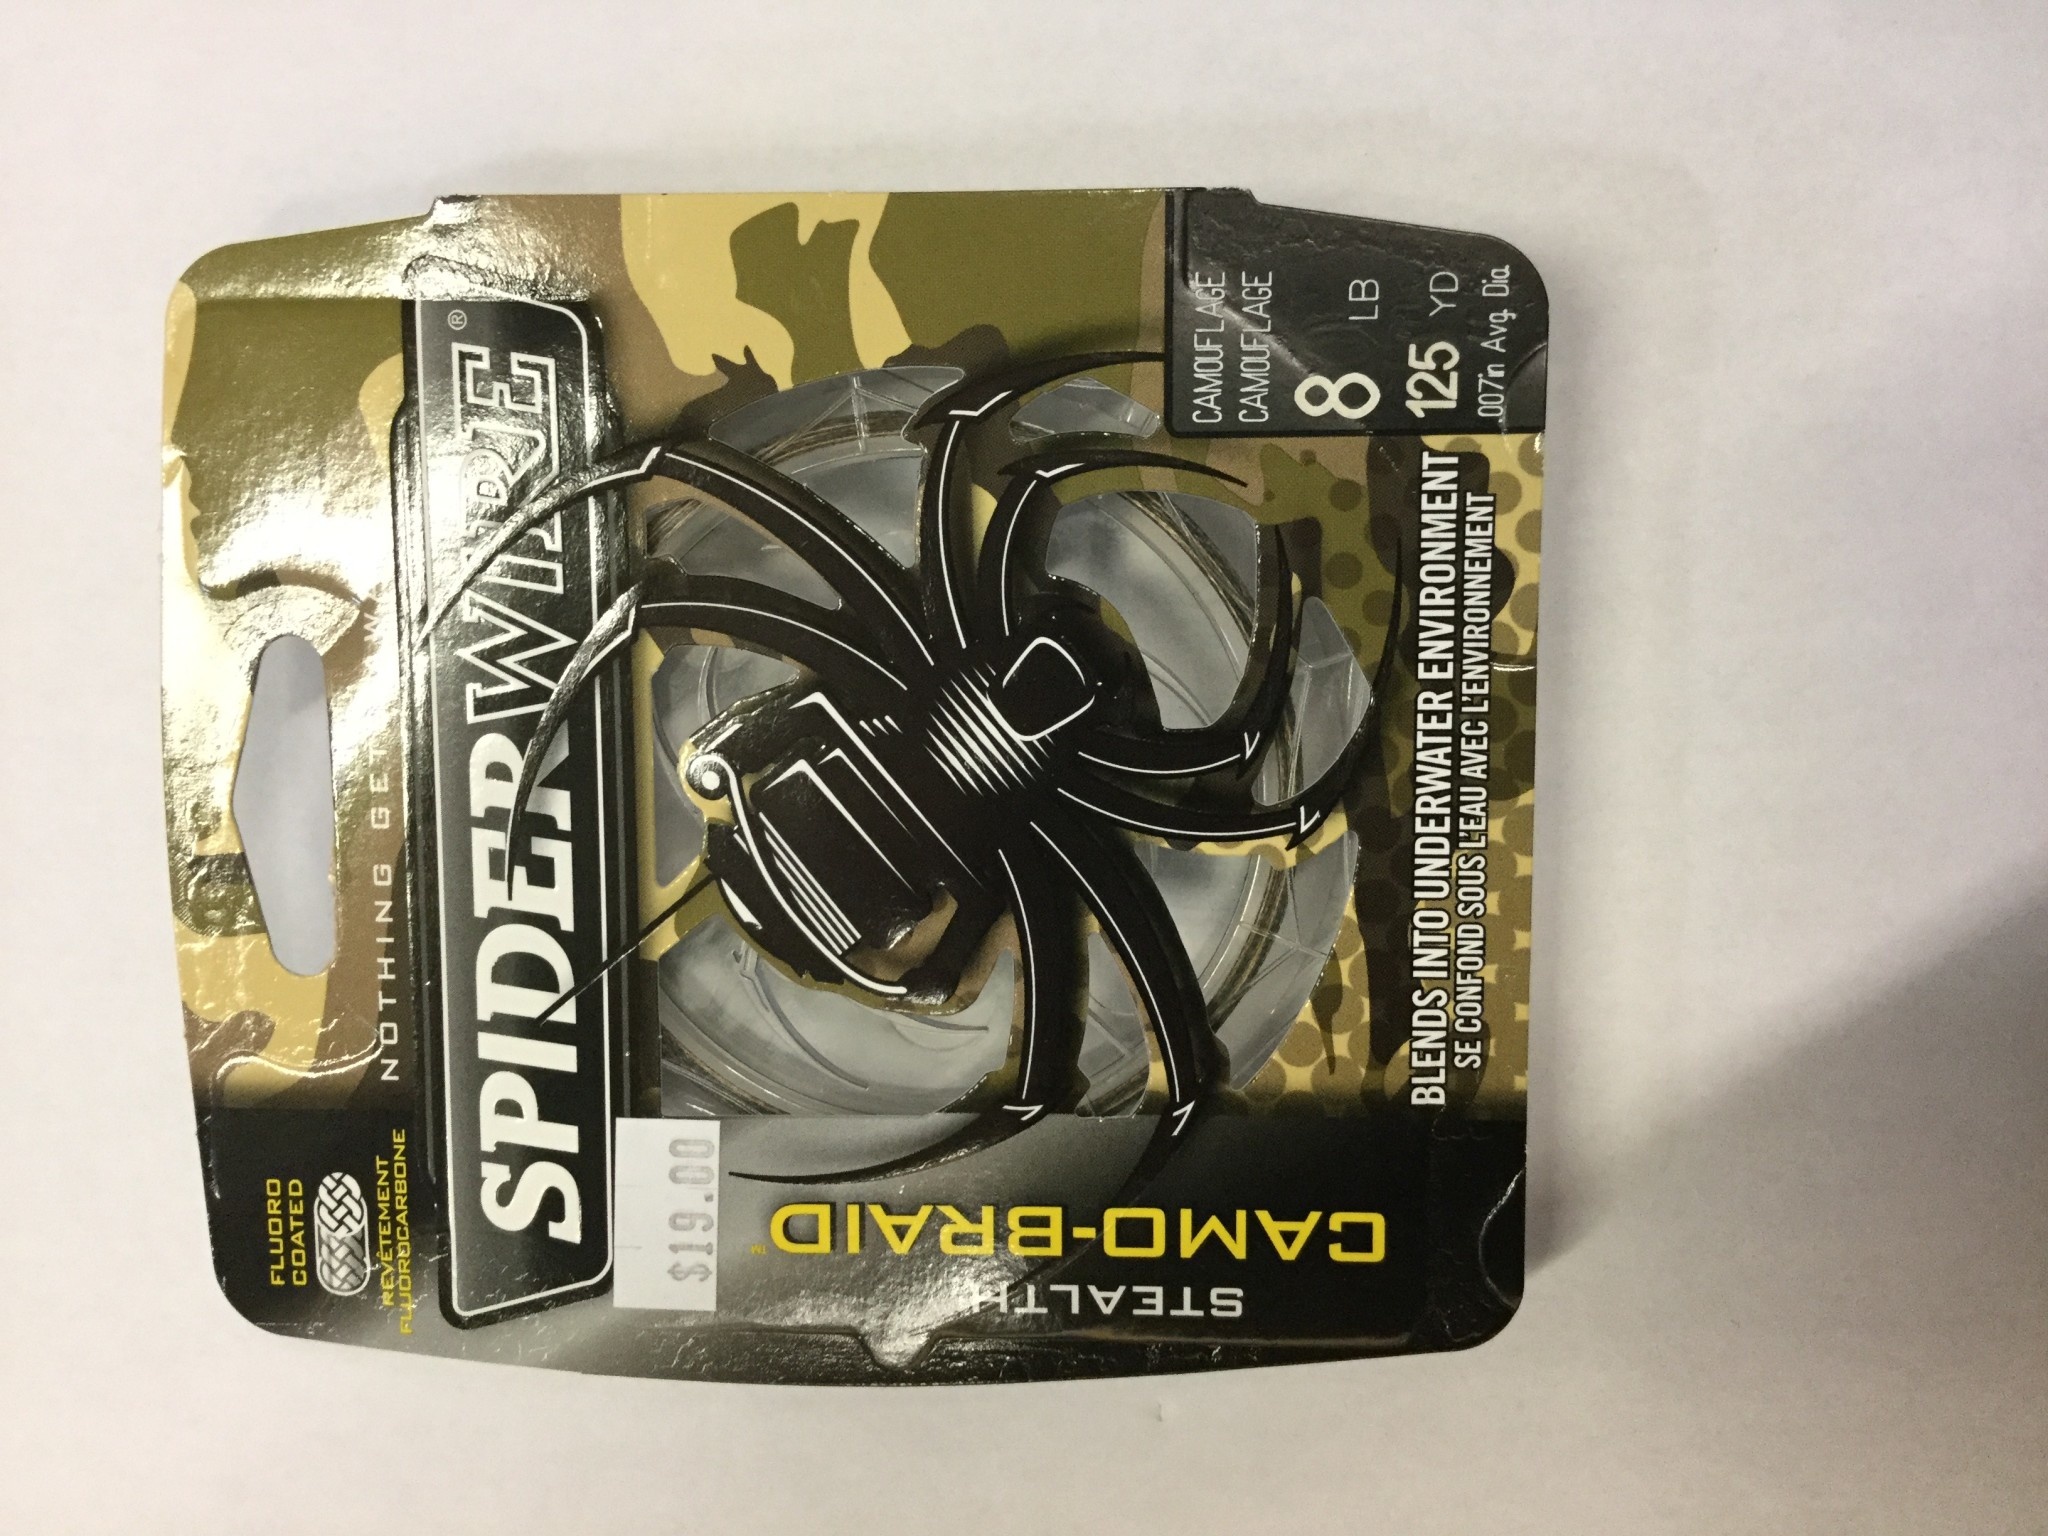 Spider Wire Stealth Camo Braid 8lb Camouflage - Preeceville Archery Products